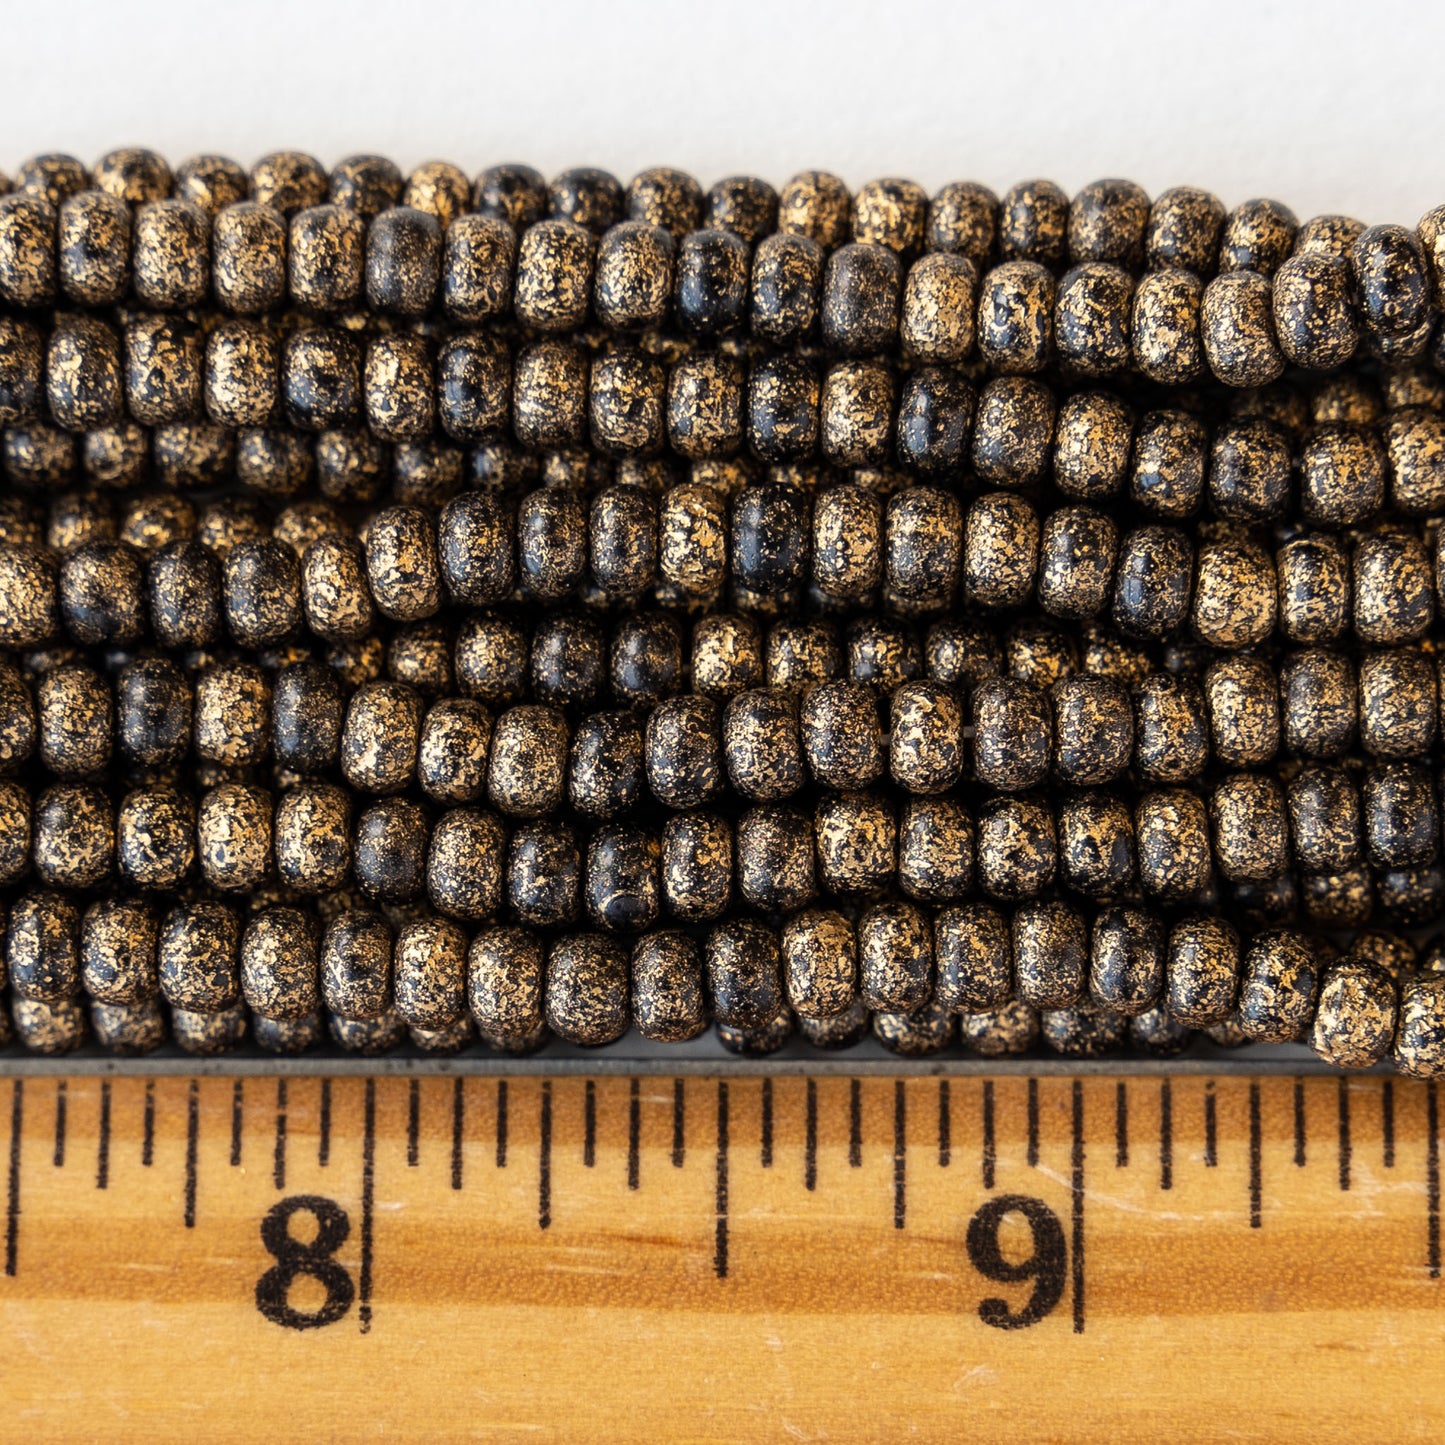 Size 6 Seed Beads - Opaque Black with Gold Dust - Choose Amount